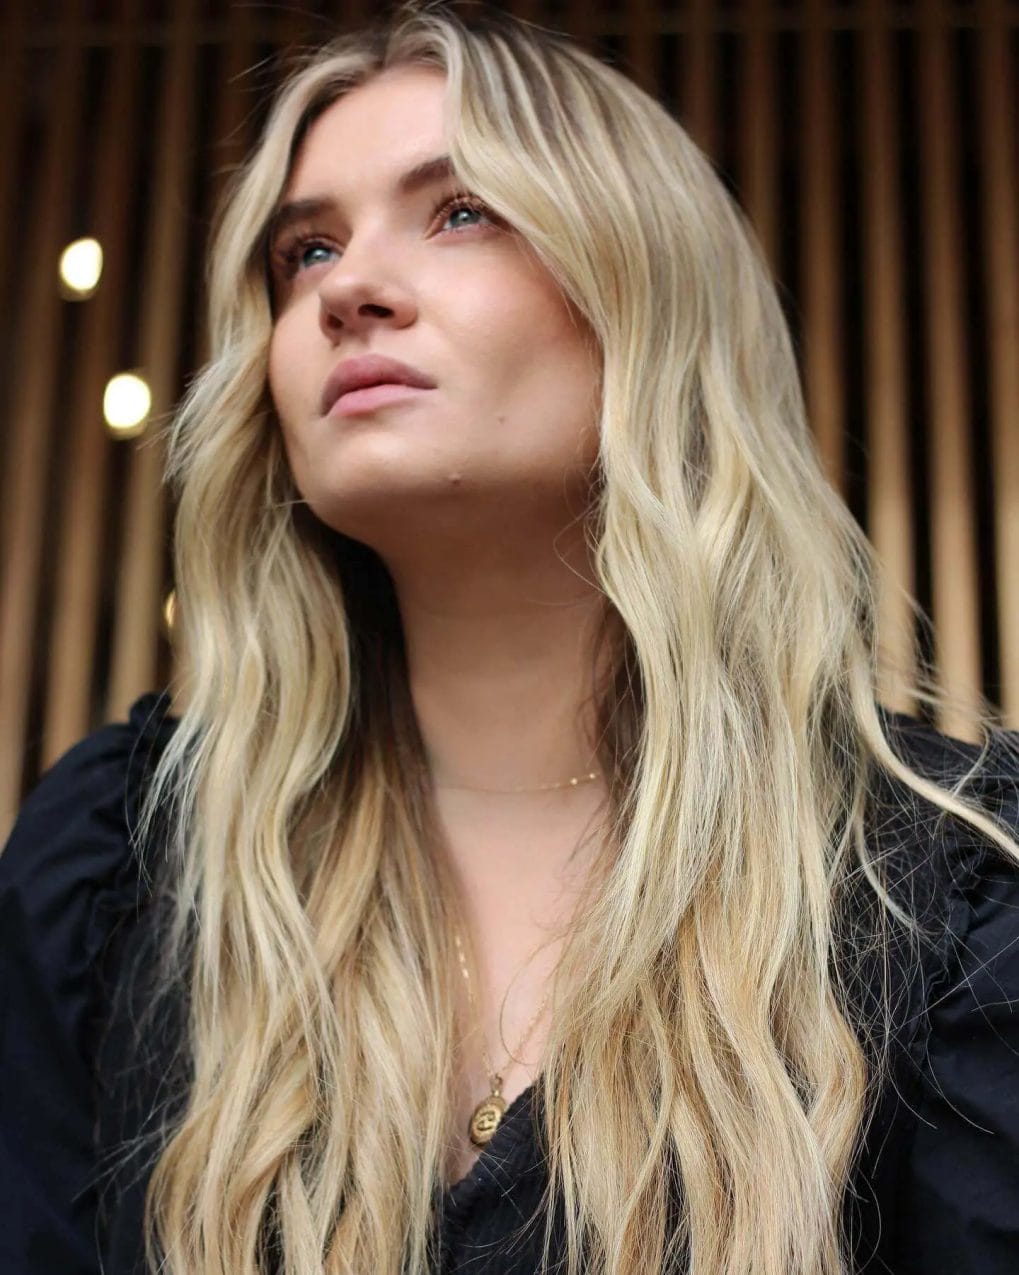 Sunlit golden ombre waves with middle-parted curtain bangs